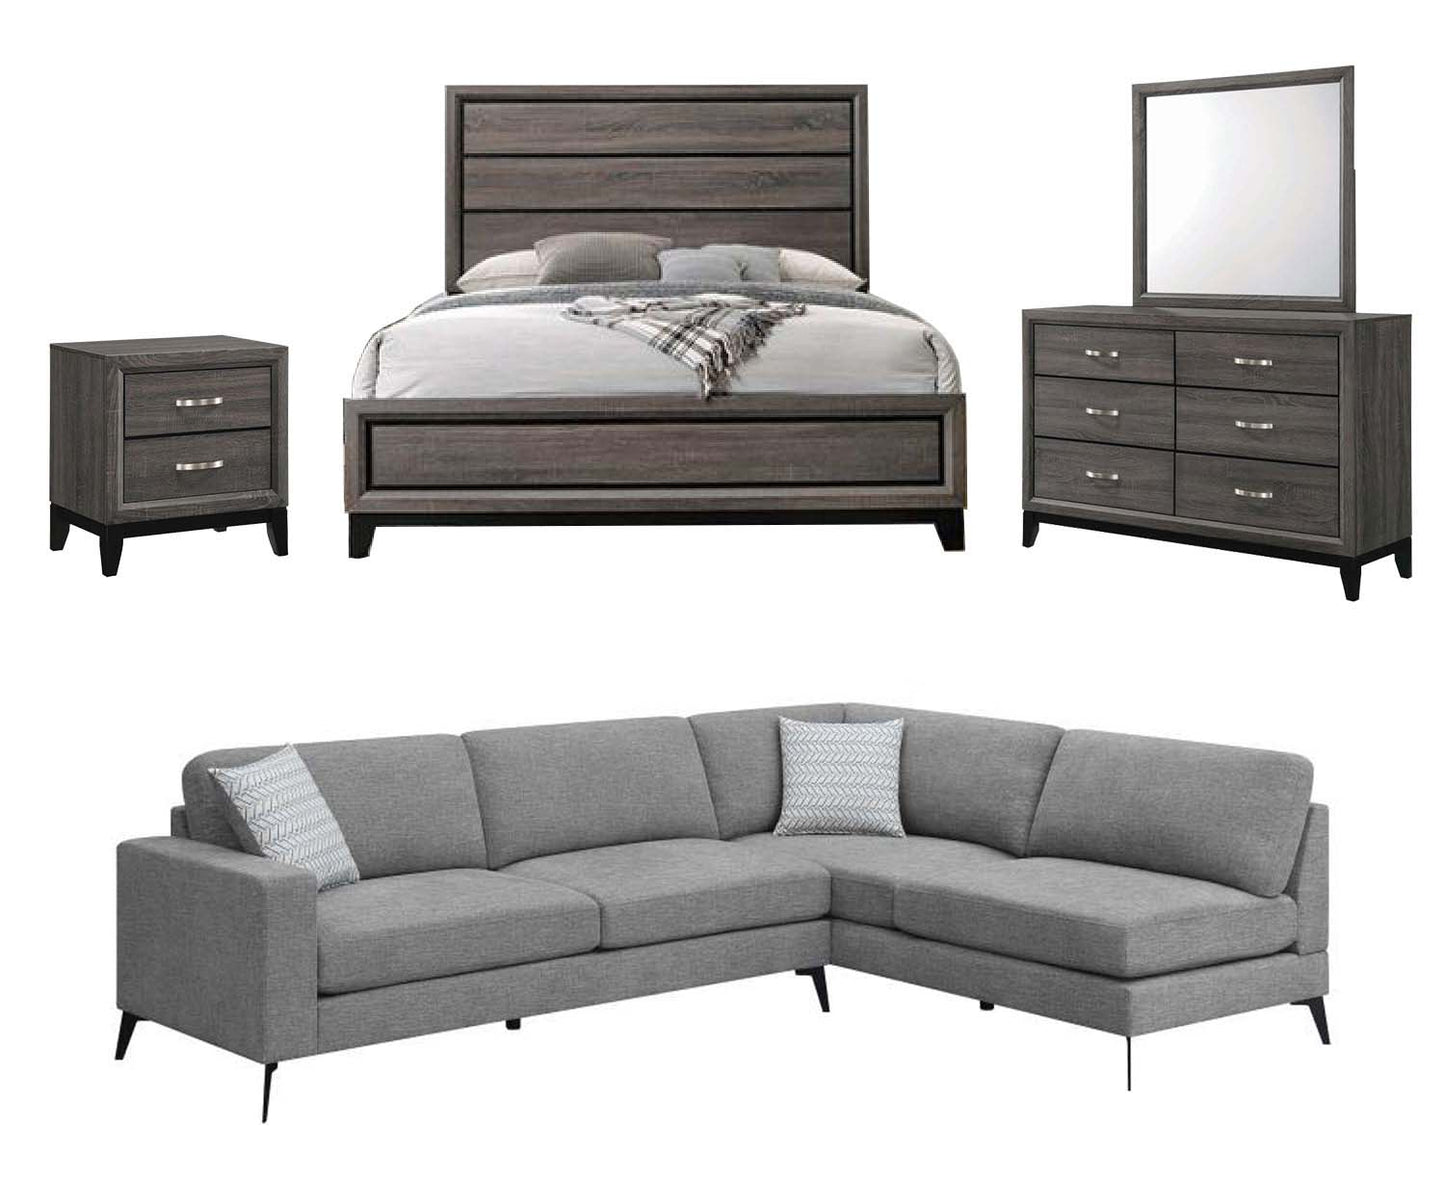 Watson Queen Bedroom Set with Clint Sectional Package Deal